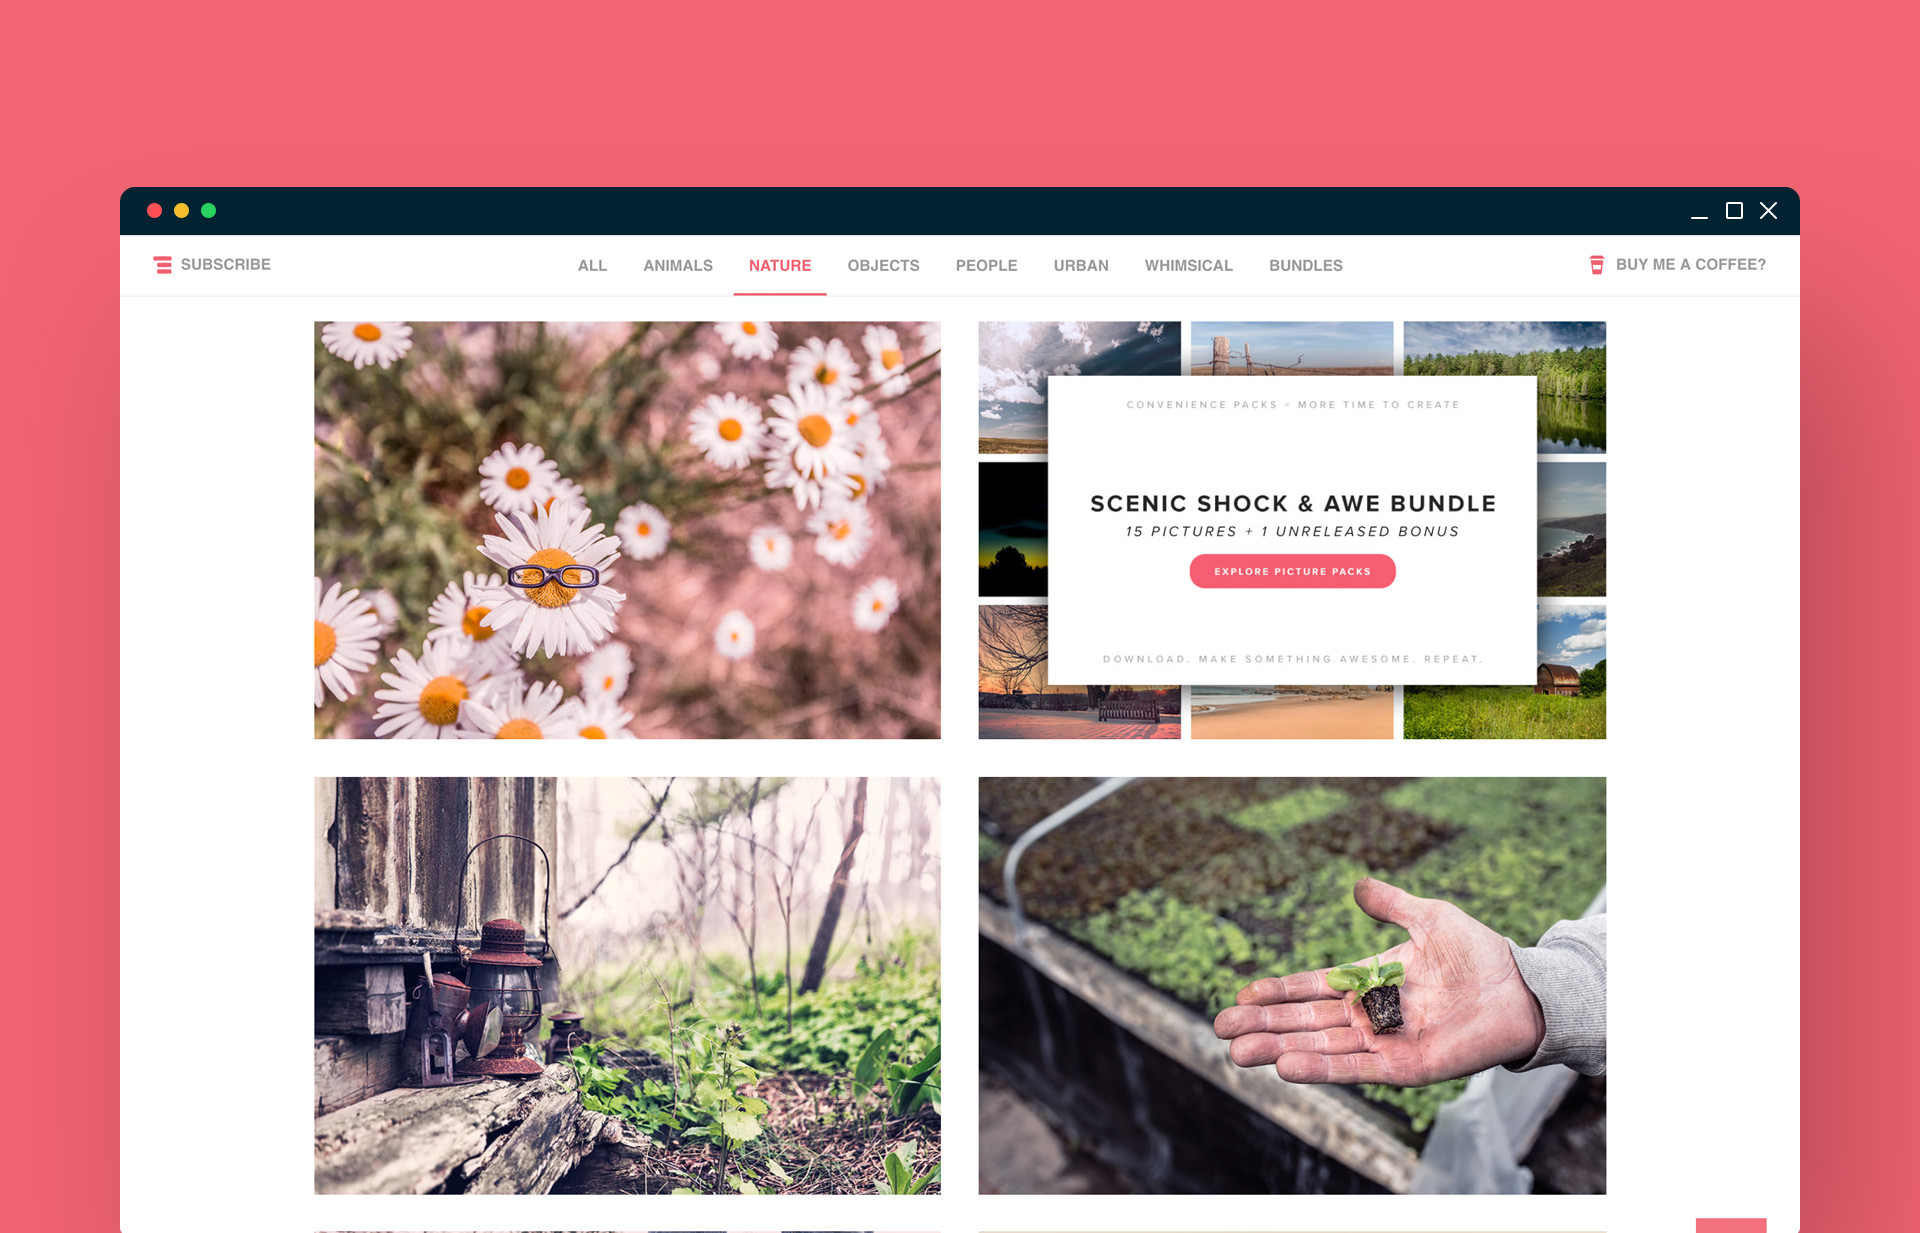 Gratisography: Web Project, Photography Resource, by Ryan McGuire